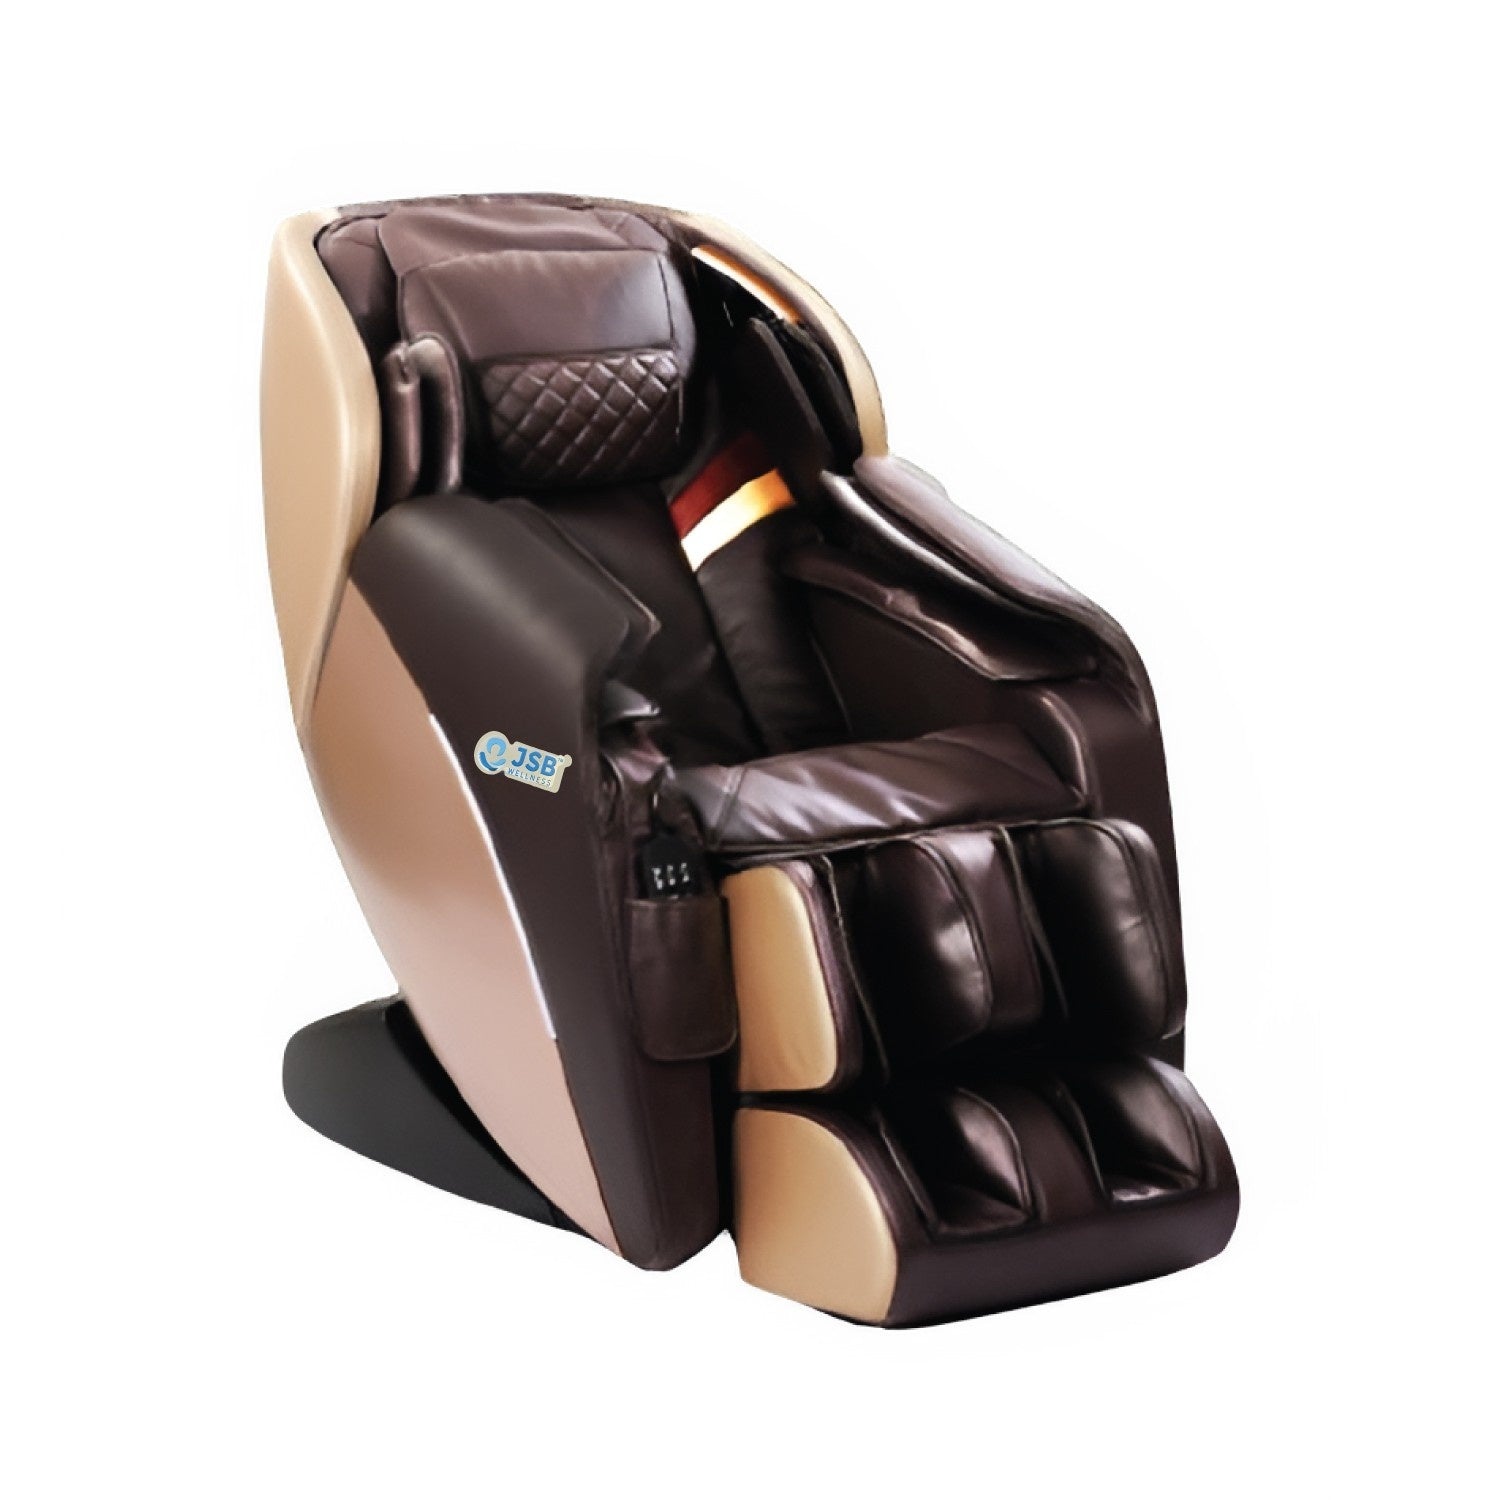 Health Benefits of Using Massage Chair India